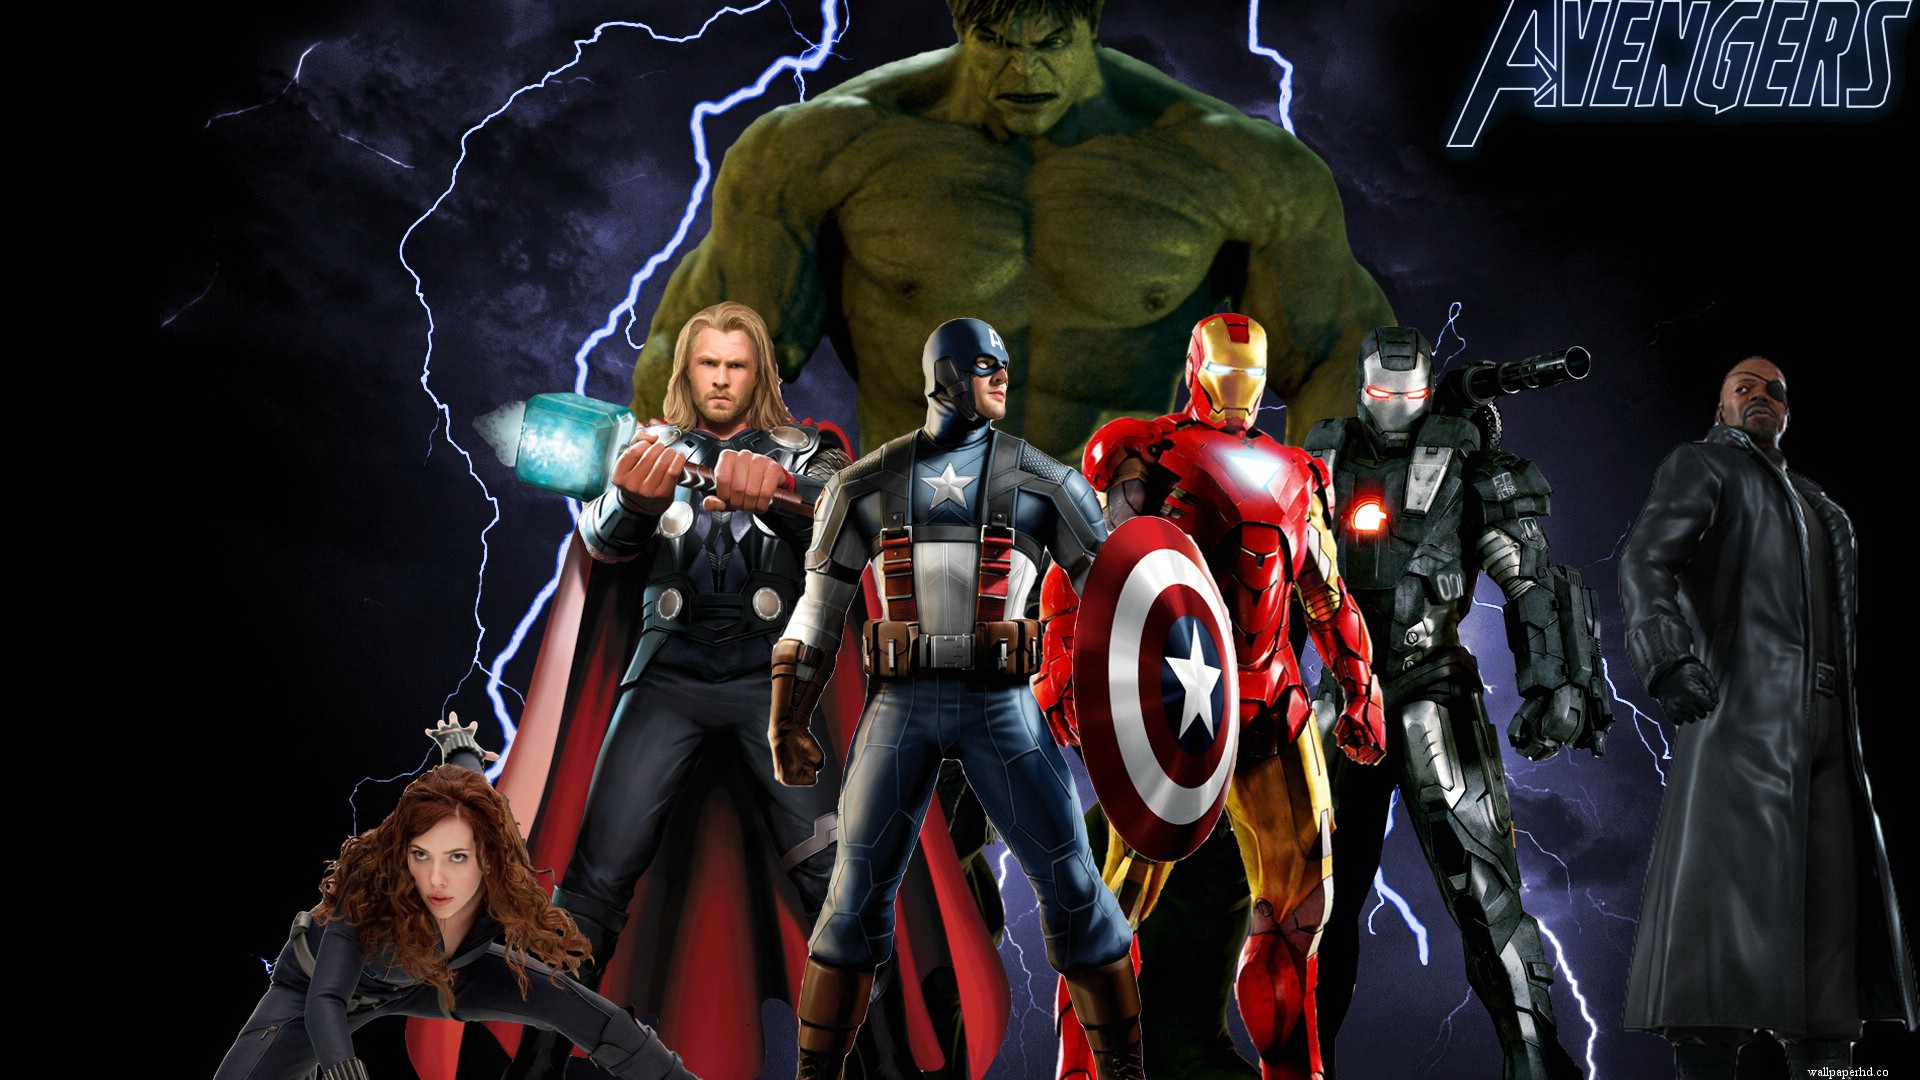 Wallpapers, Hd, Movie Wallpapers, The Avengers Wallpapers - Avengers 2012 -  1920x1080 Wallpaper 